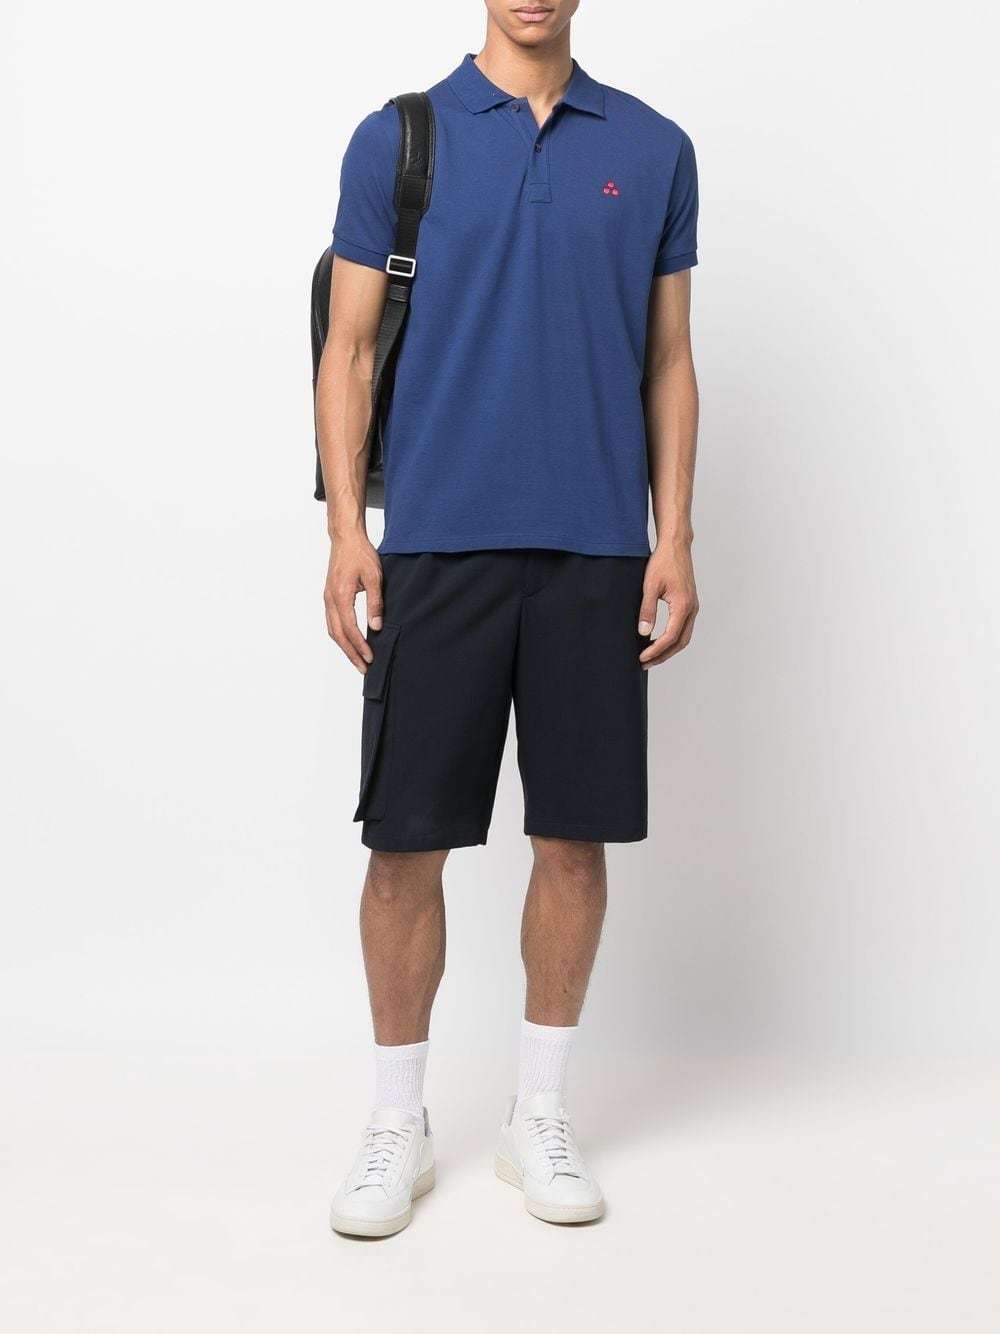 Peuterey Embroidered Logo Polo Shirt, $56 | farfetch.com | Lookastic